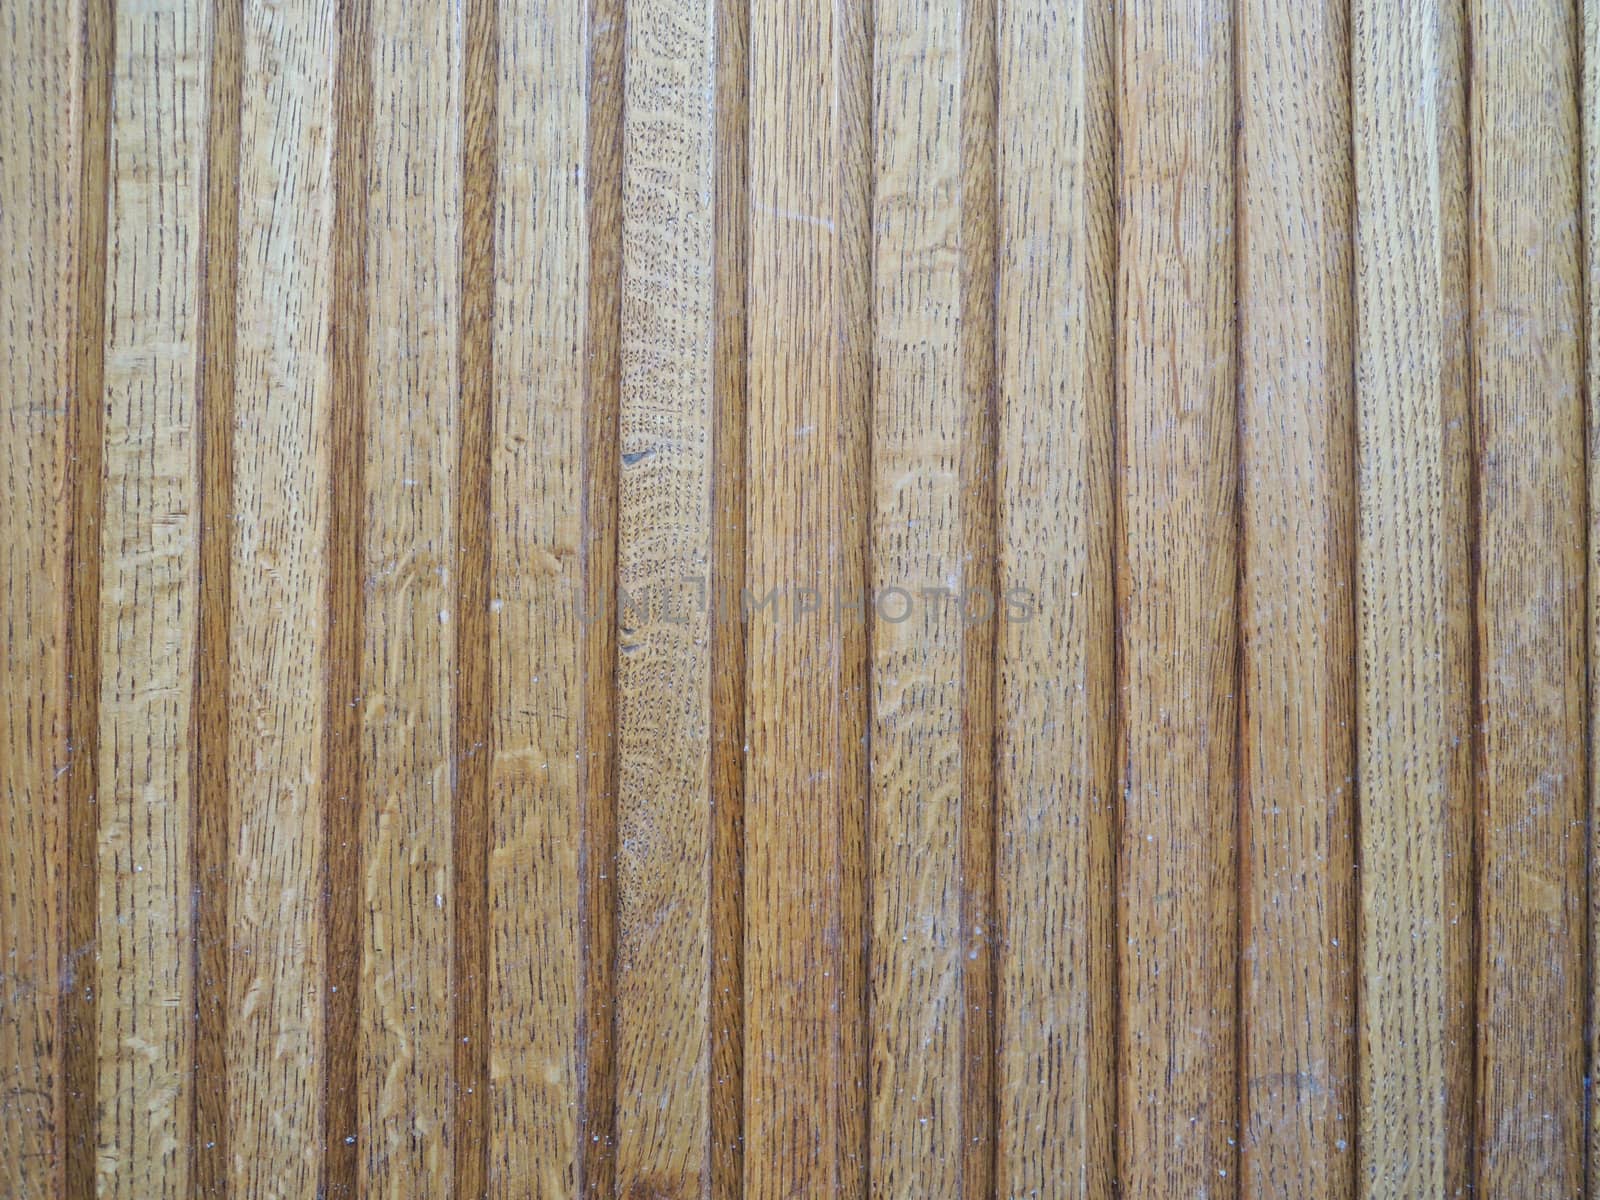 Wood texture background by MalyDesigner